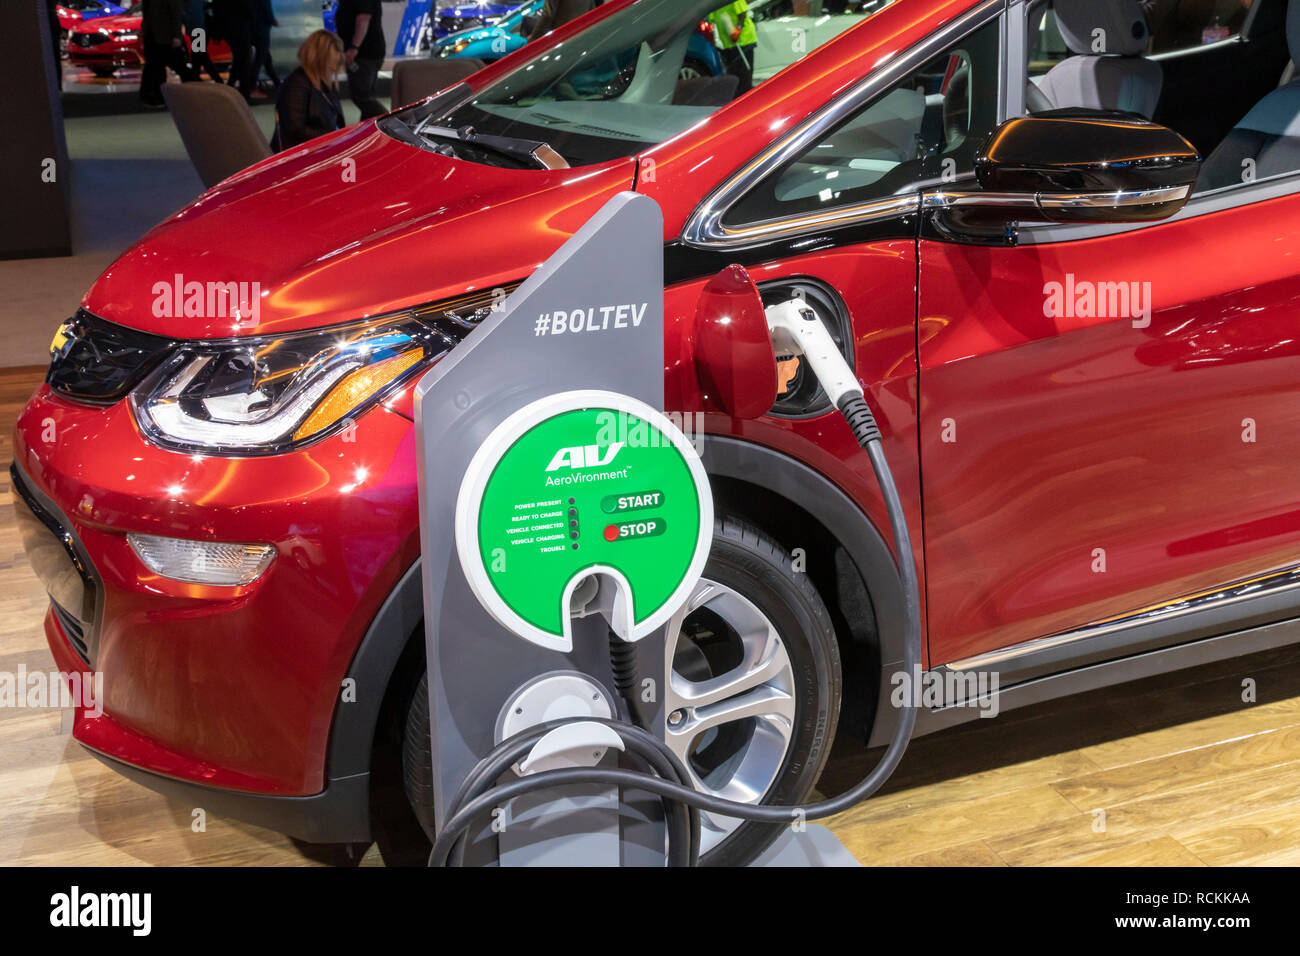 Detroit, Michigan - The Chevrolet Bolt electric car on display at the North American International Auto Show. Stock Photo